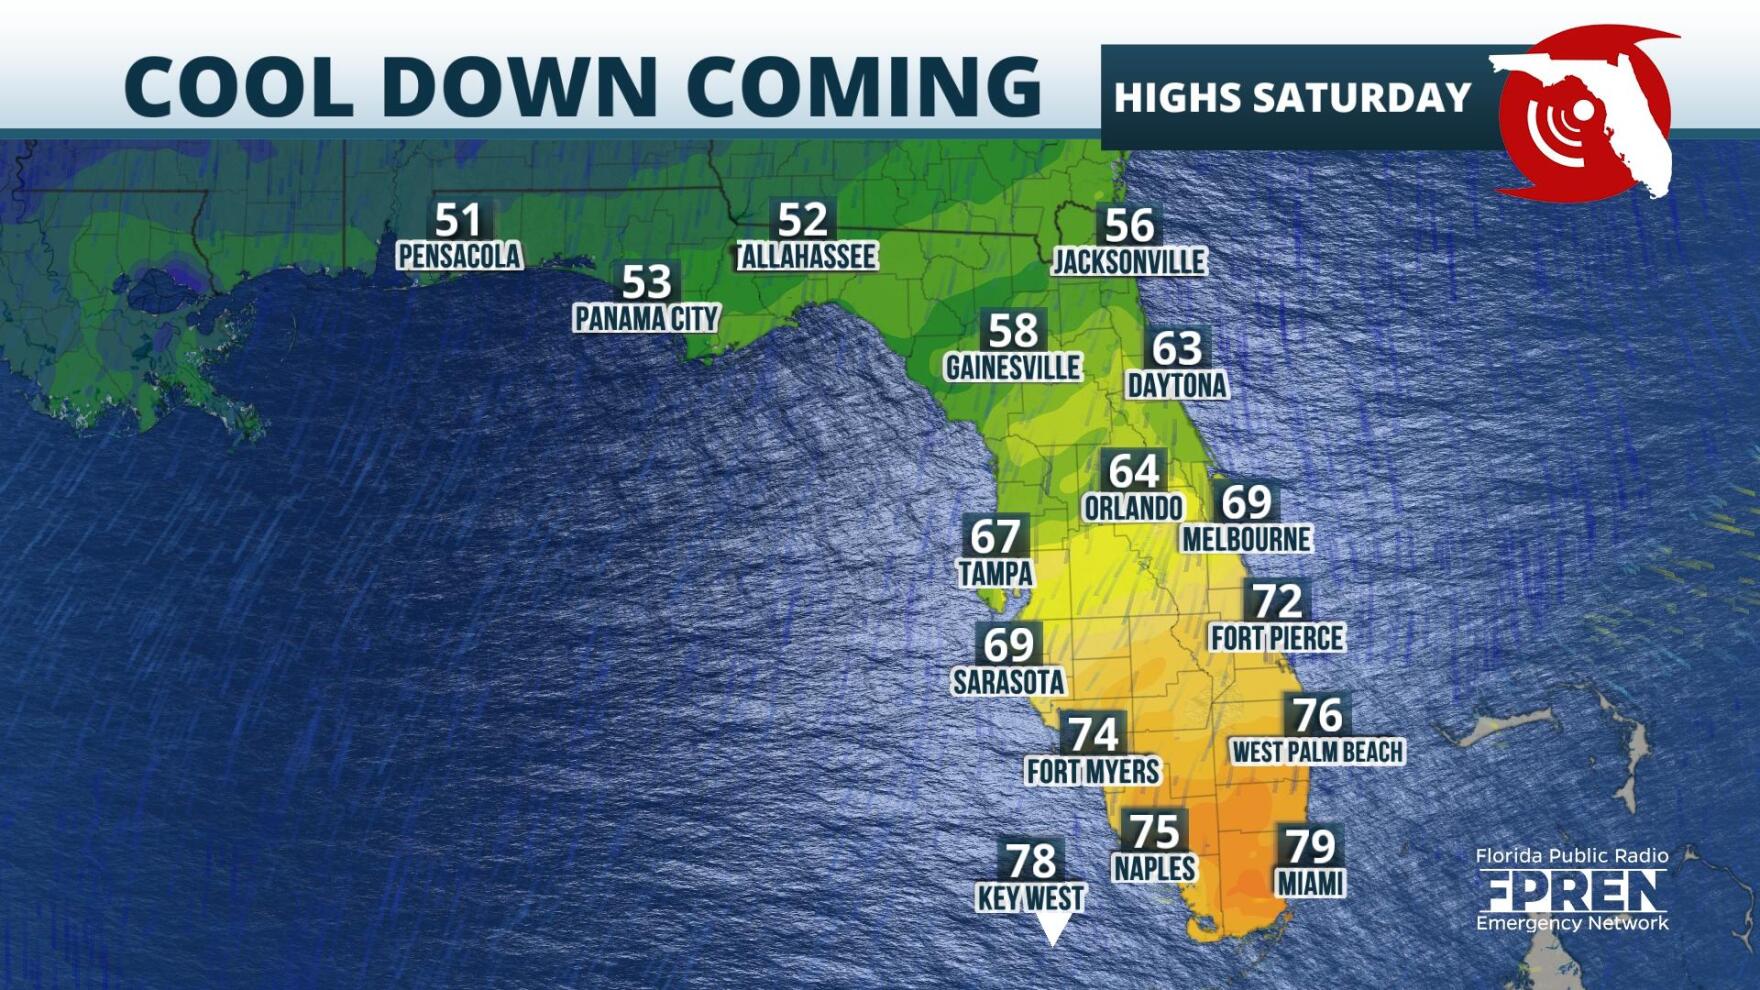 Another Cool Down Coming for Part of the Sunshine State